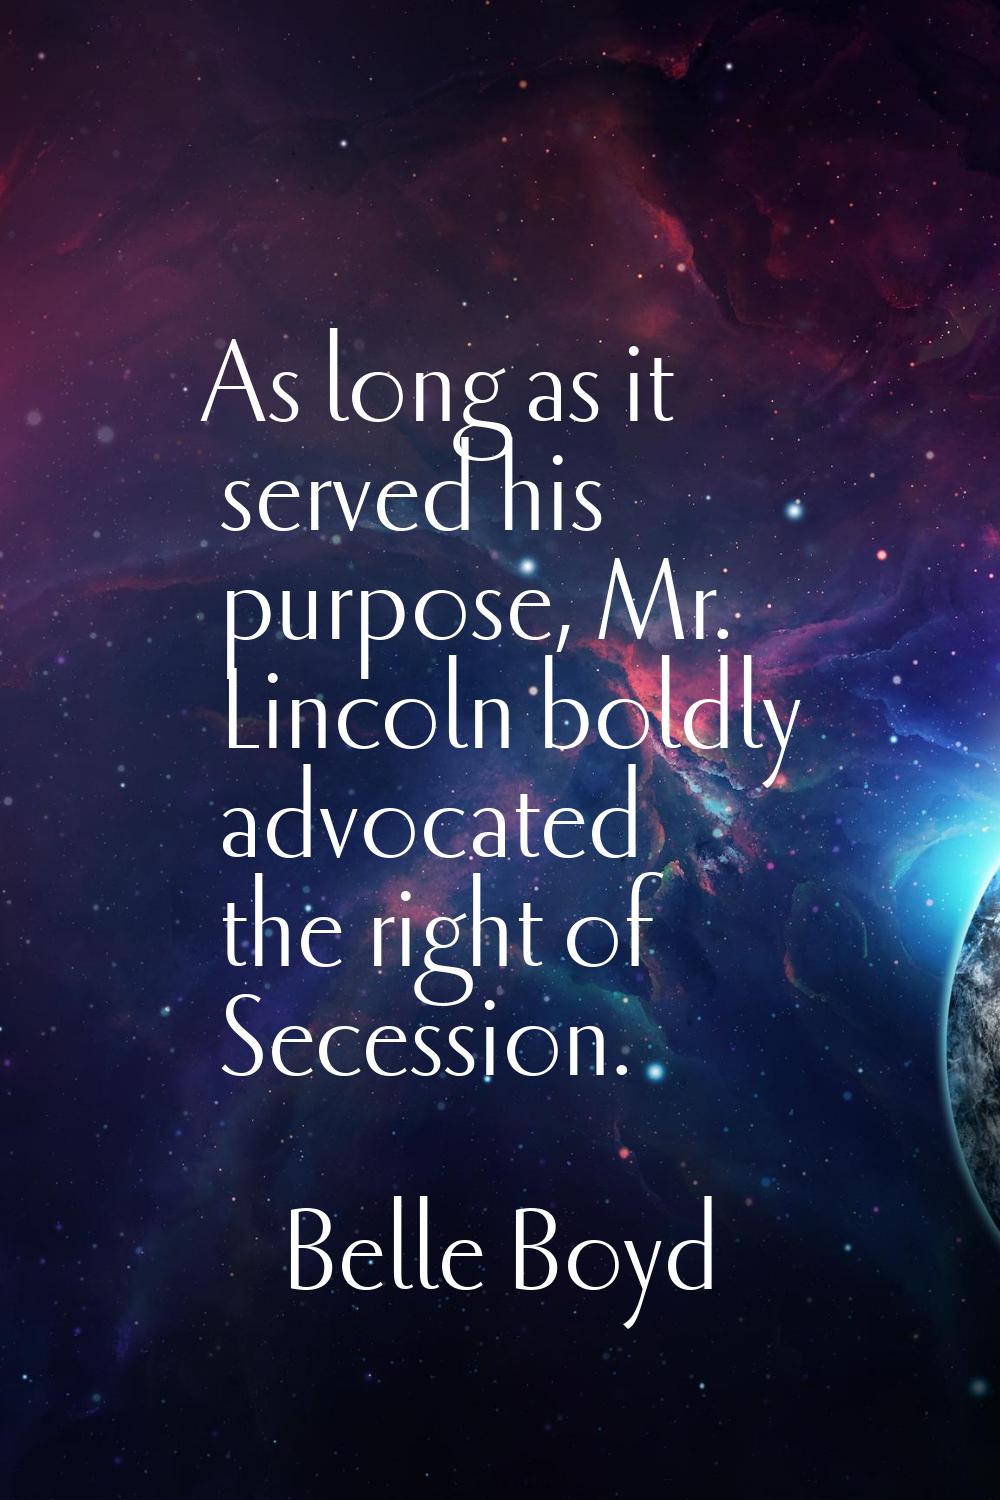 As long as it served his purpose, Mr. Lincoln boldly advocated the right of Secession.